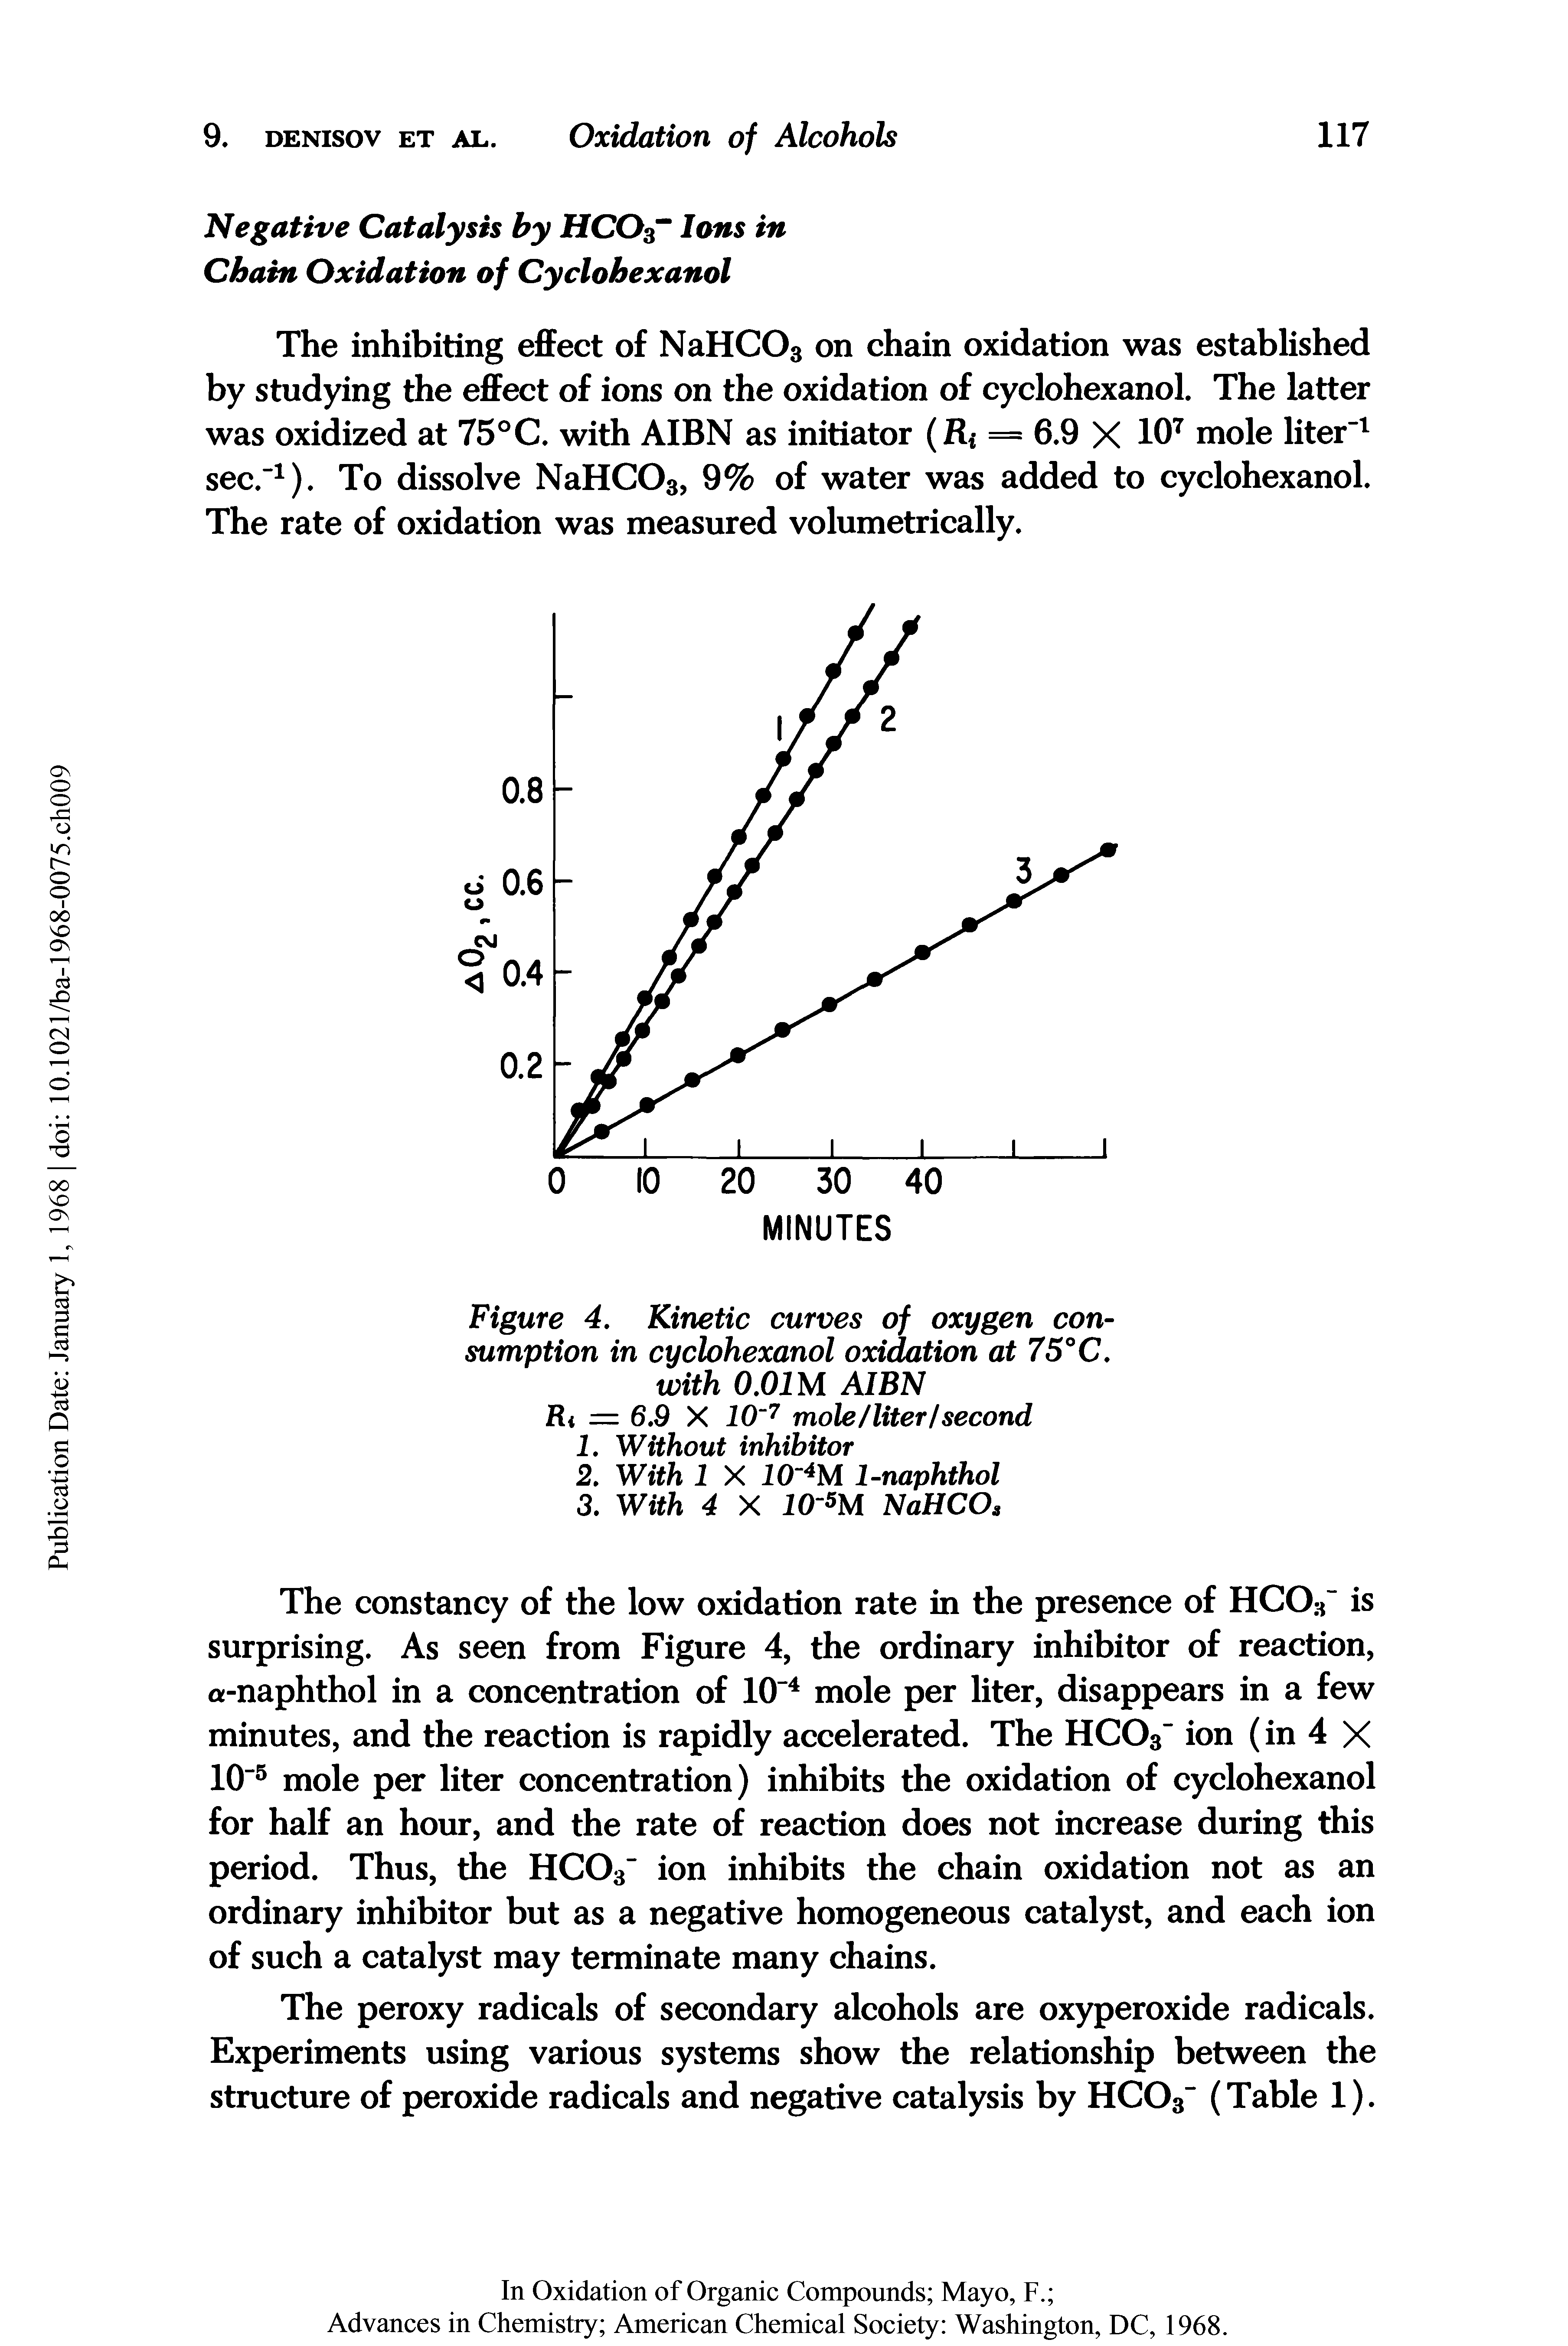 Figure 4. Kinetic curves of oxygen consumption in cyclohexanol oxidation at 75°C. with 0.01M AIBN Ri = 6.9 X 10 7 mole/liter/second...